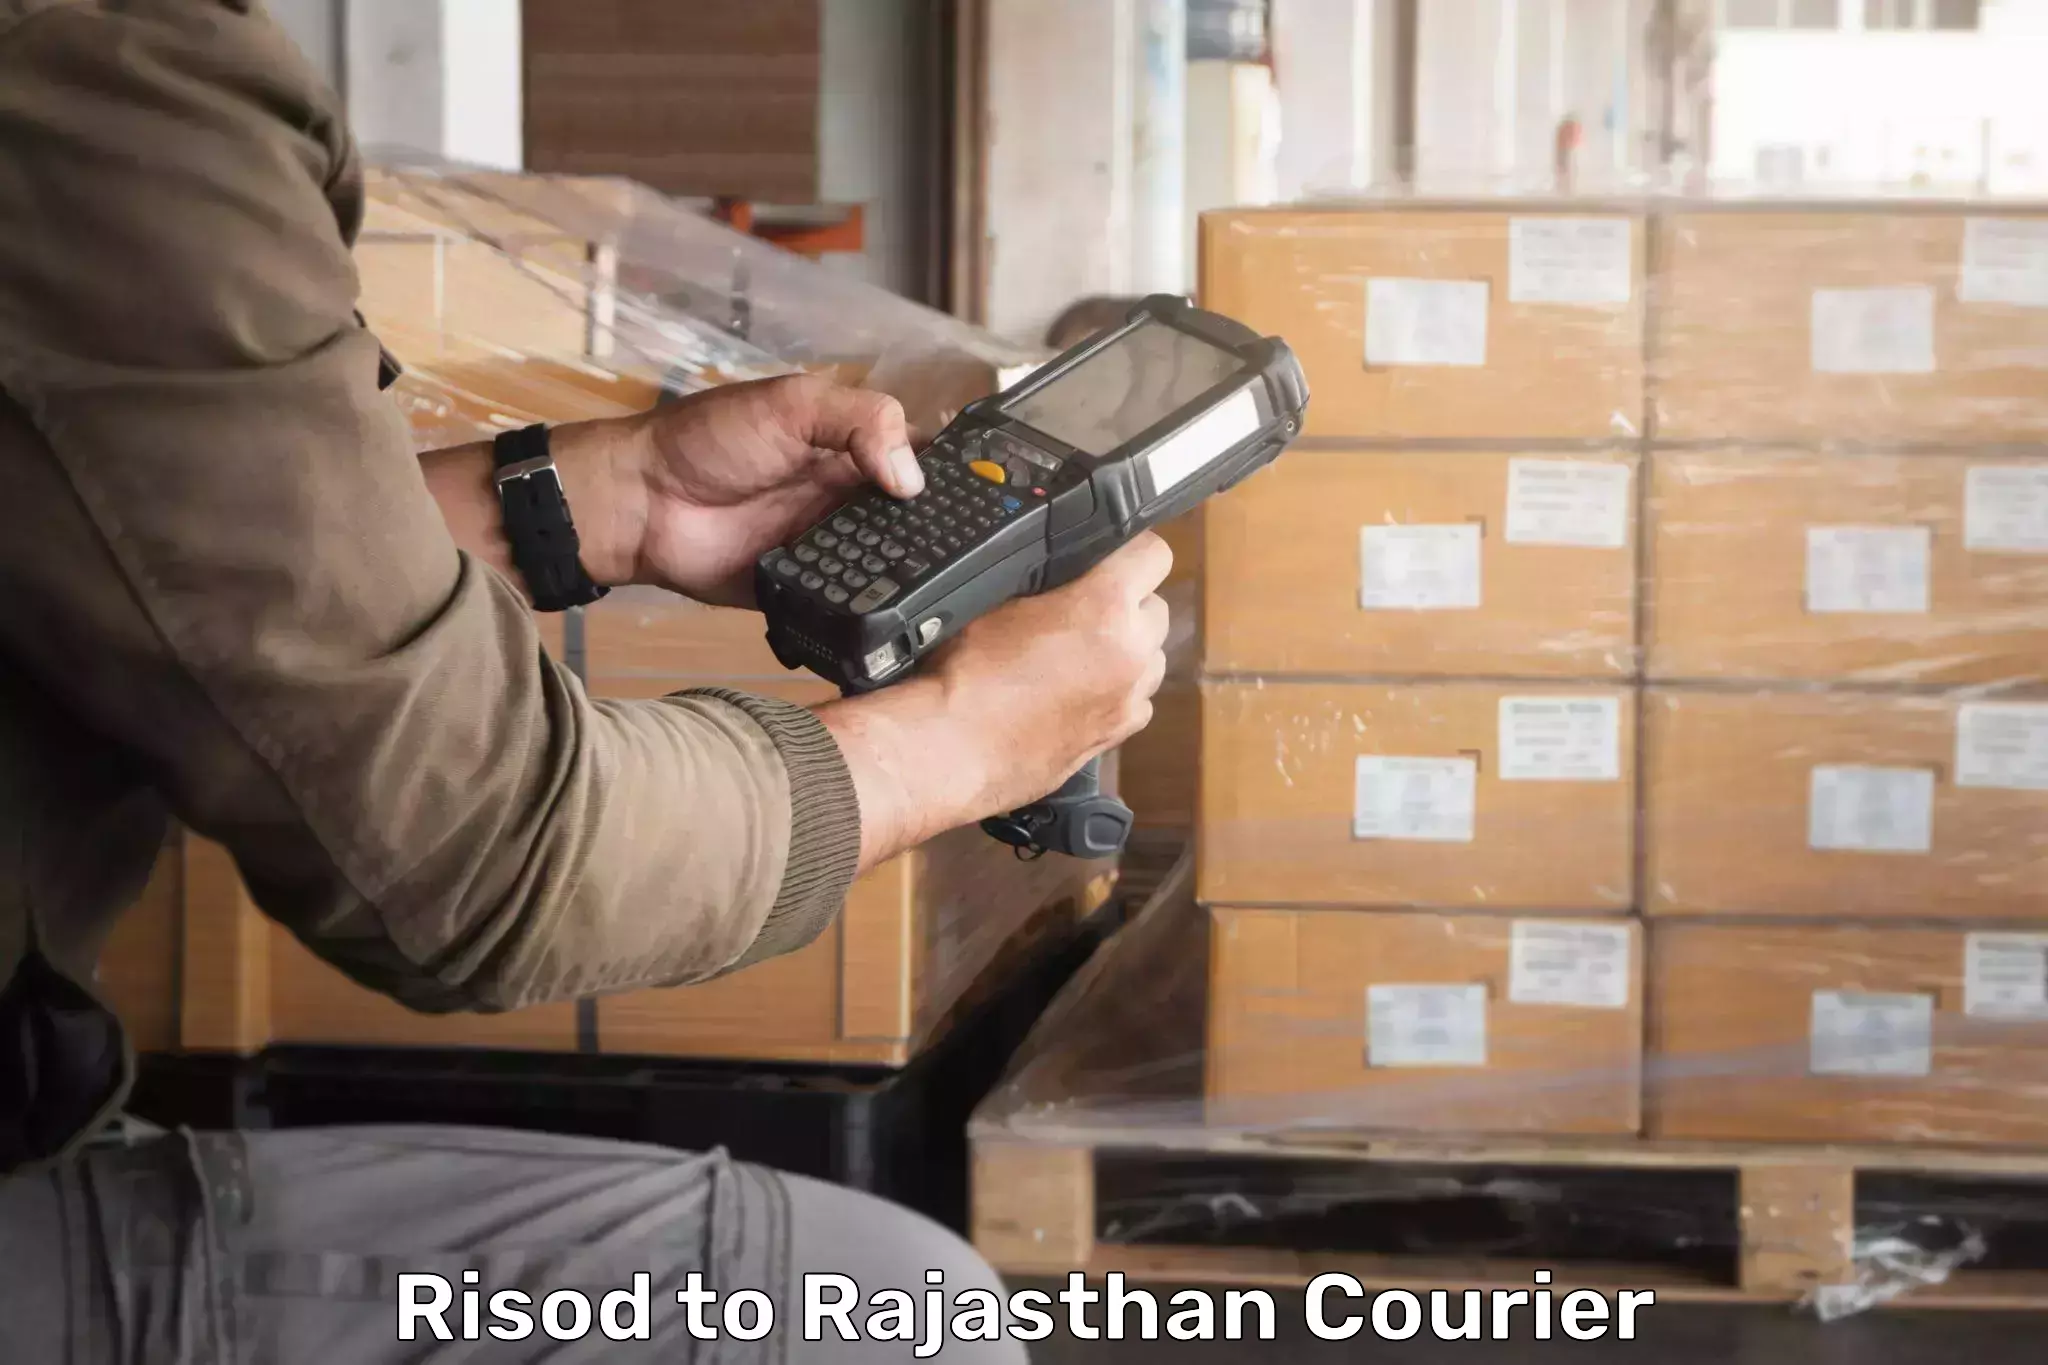 Large package courier Risod to Bijainagar